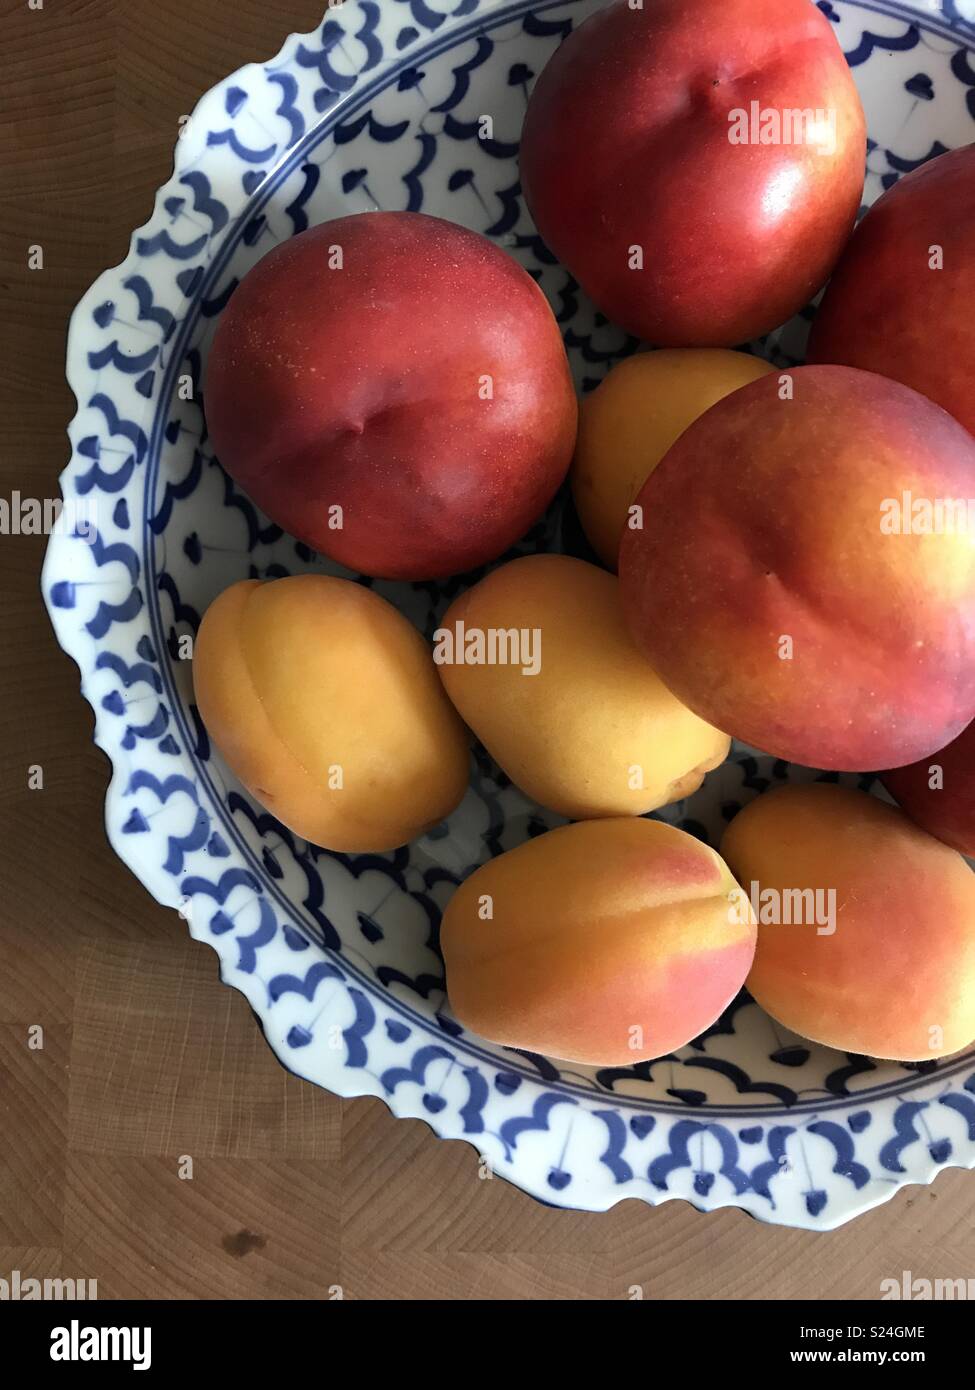 Summer fruit nectarines and apricots Stock Photo